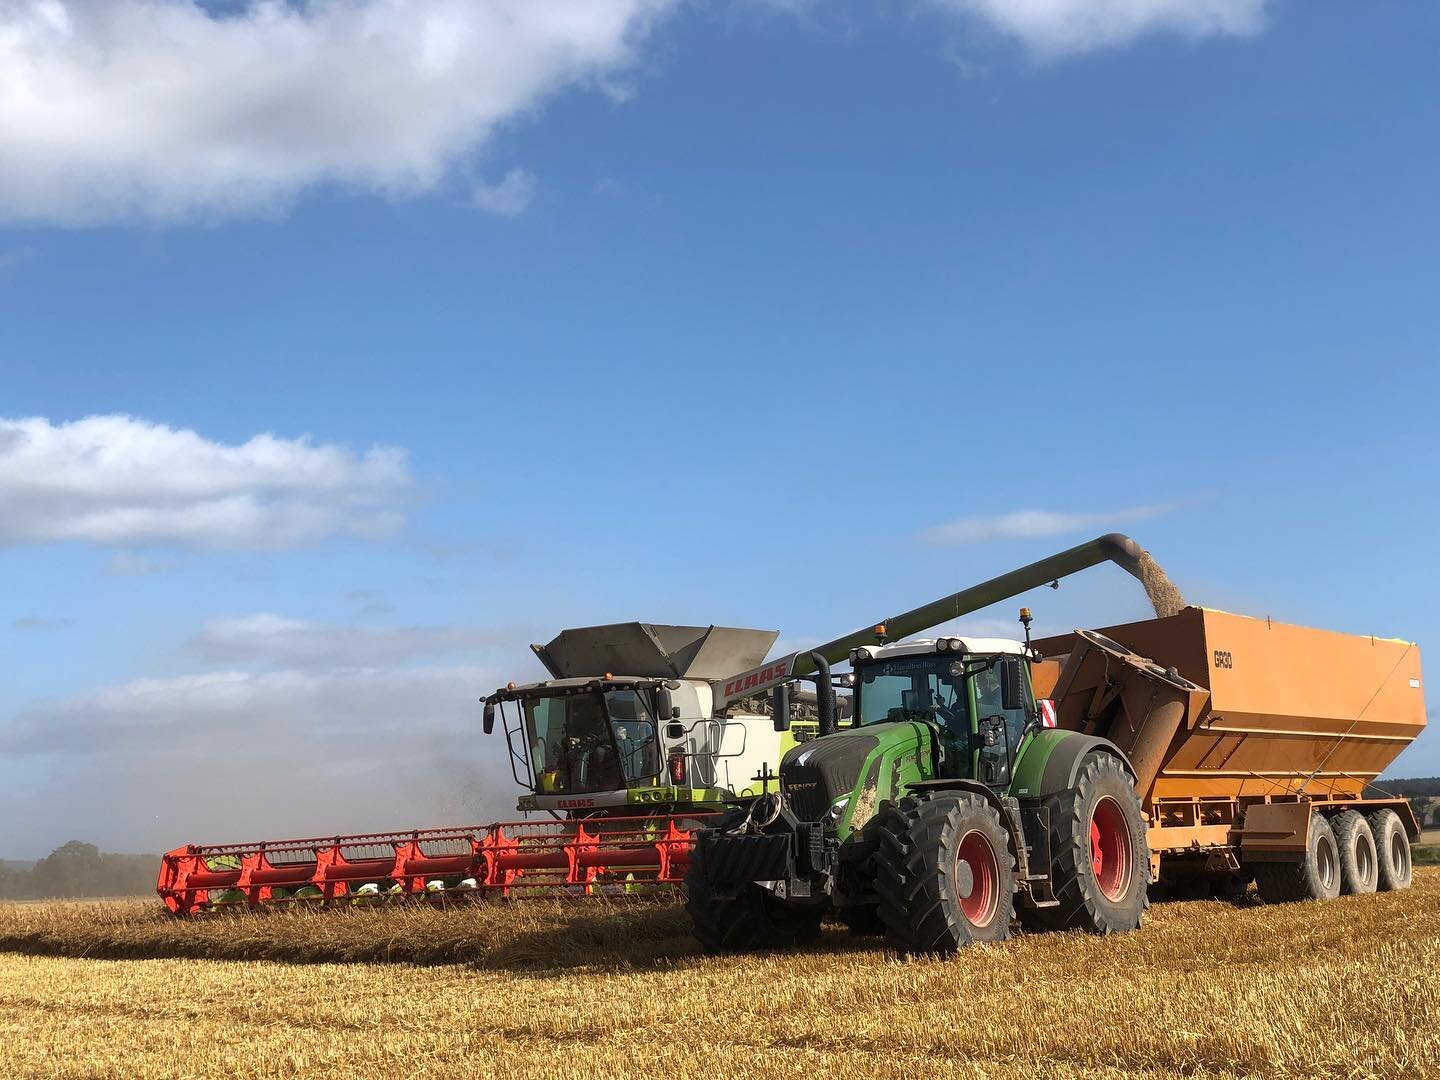 🌾🌾*HARVEST OPERATOR REQUIRED*🌾🌾

Hay Farms are looking for an experienced operator to join our team this harvest. We are a 8,000 acres arable business based around Perth looking for an enthusiastic and driven individual with the ability to operat